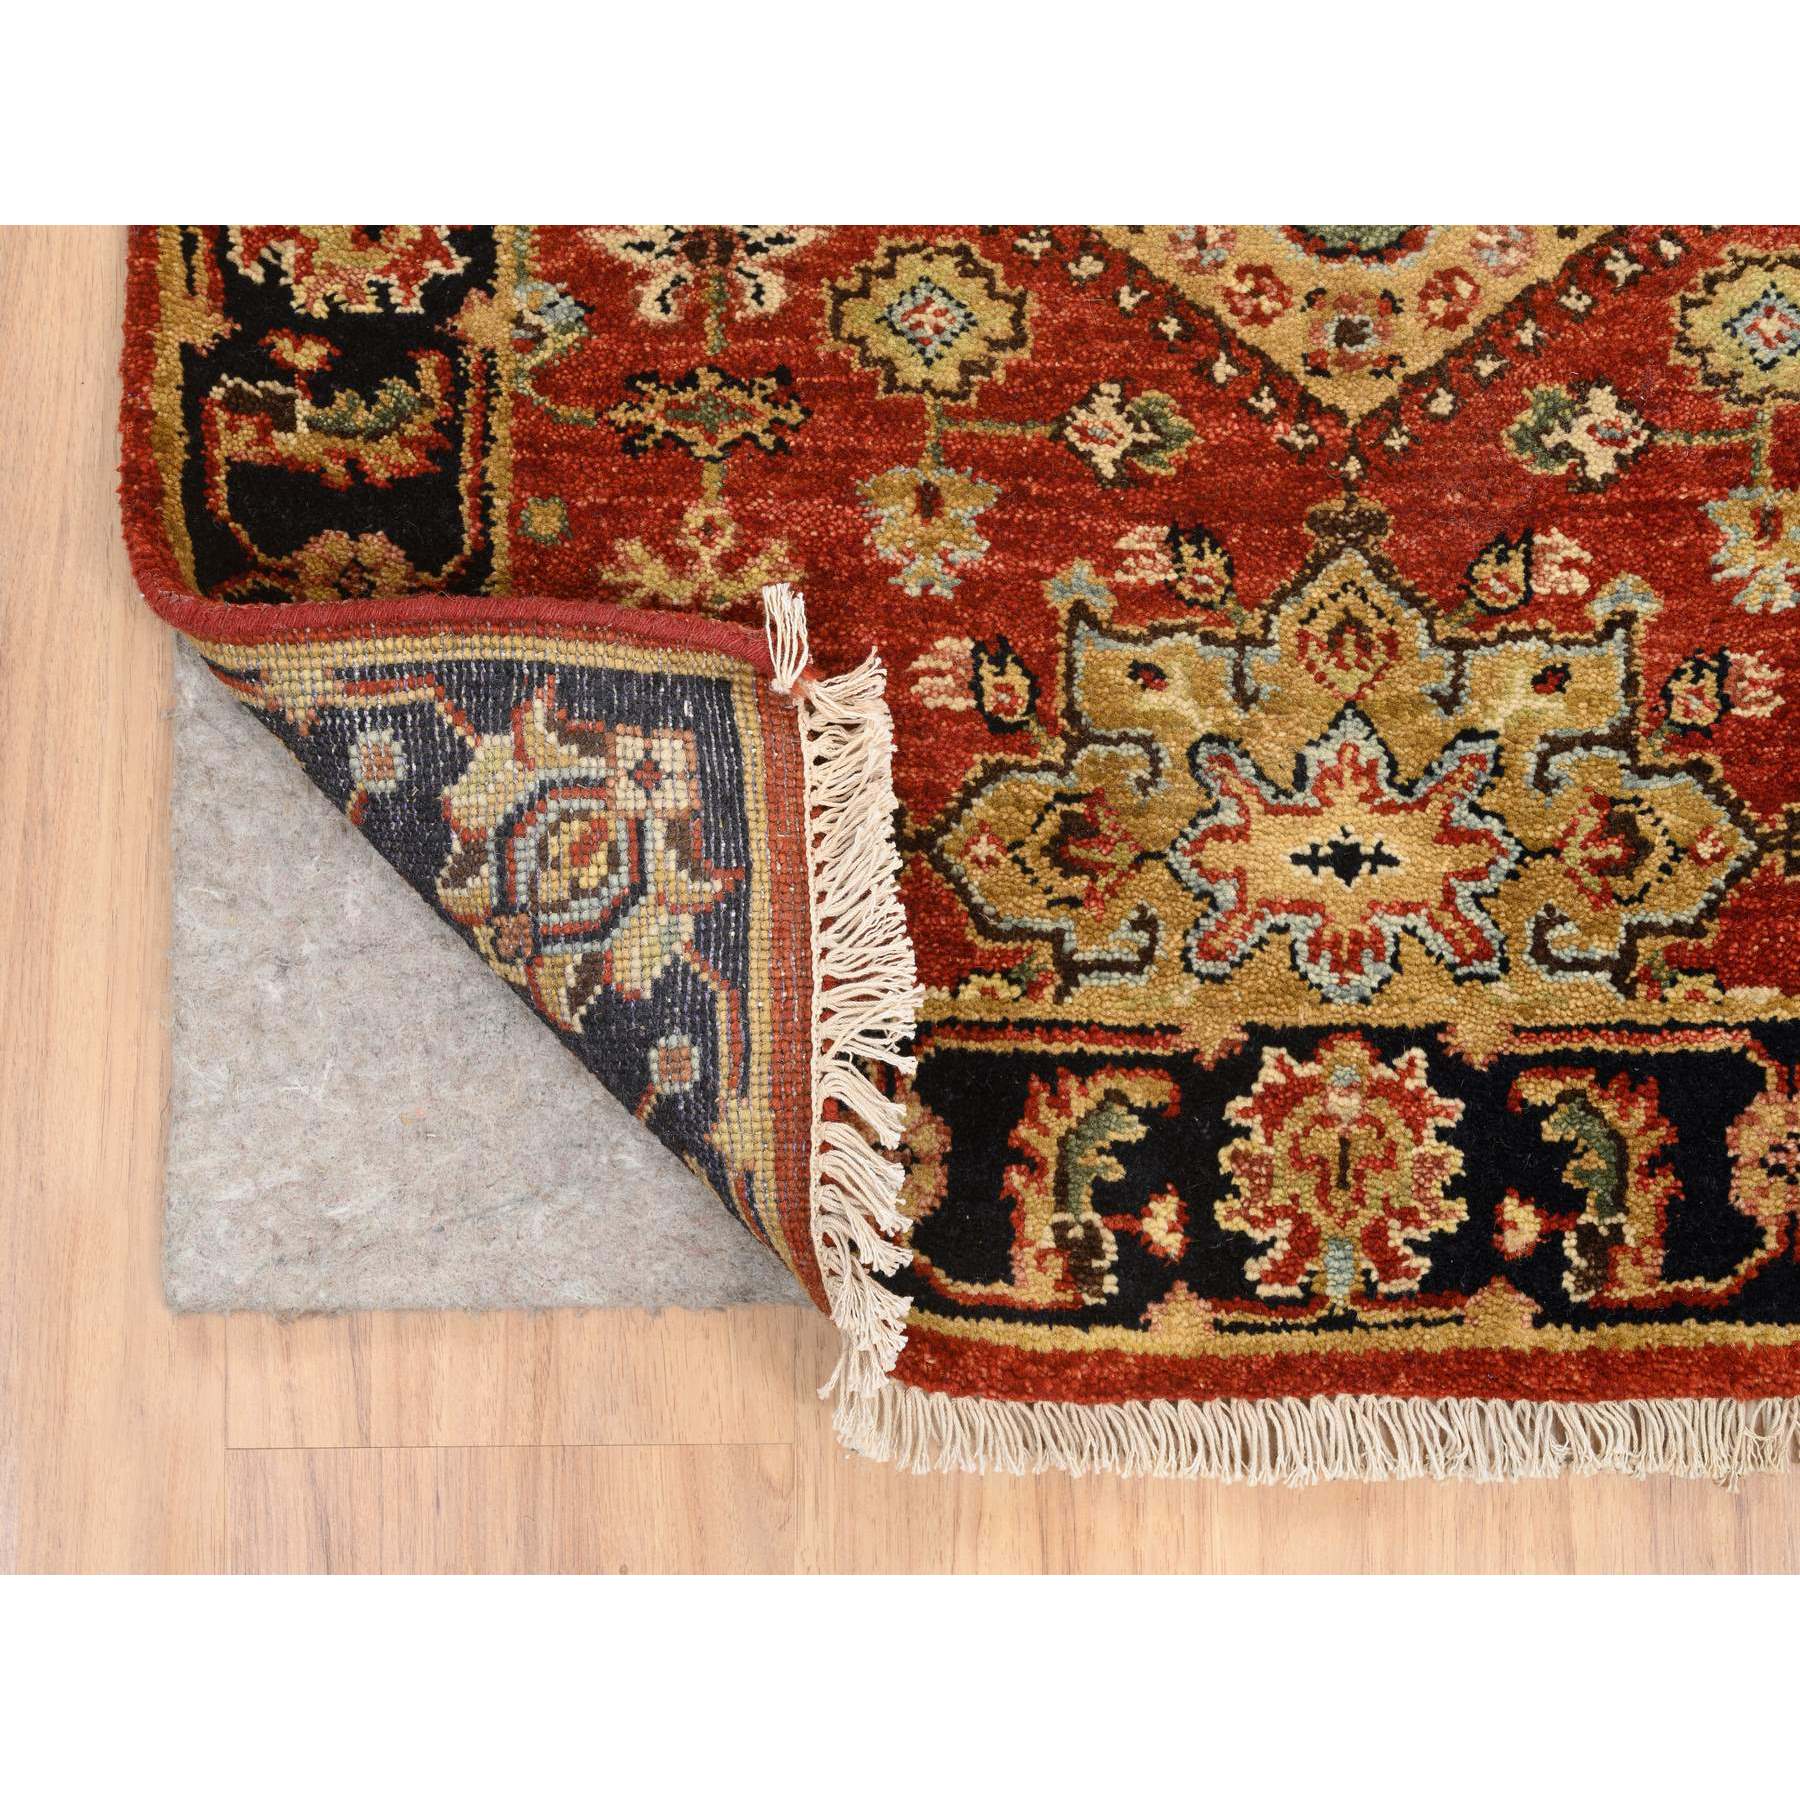 2'9"x22' Red and Black, Karajeh Design with Tribal Medallions, Organic Wool Hand Woven, XL Runner Oriental Rug 